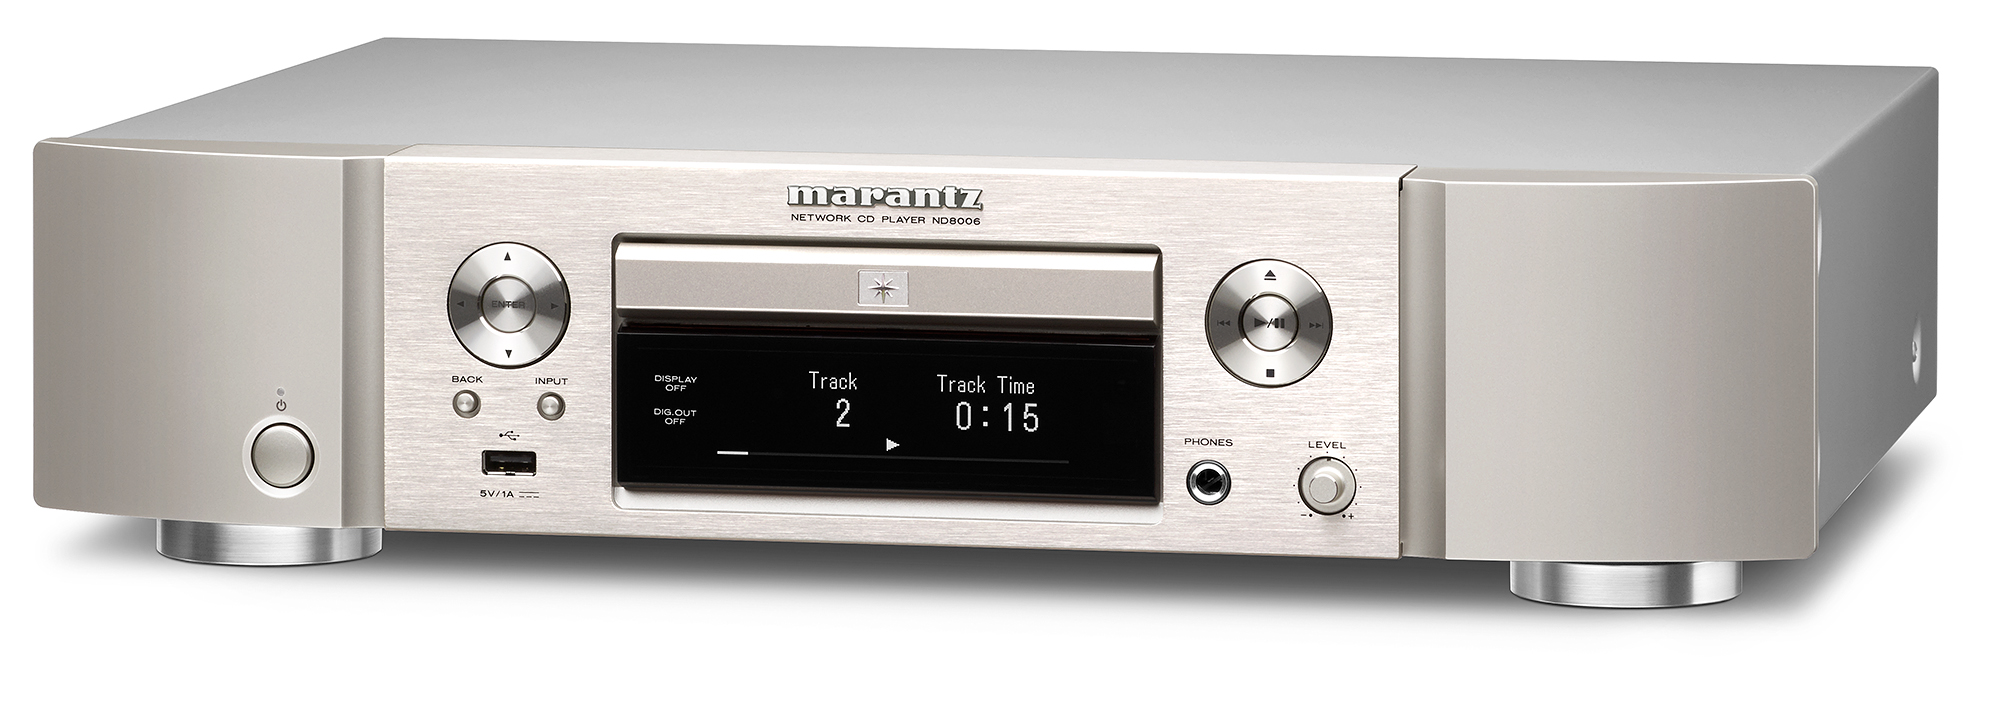 Marantz answers Yamaha with a network CD player of their own